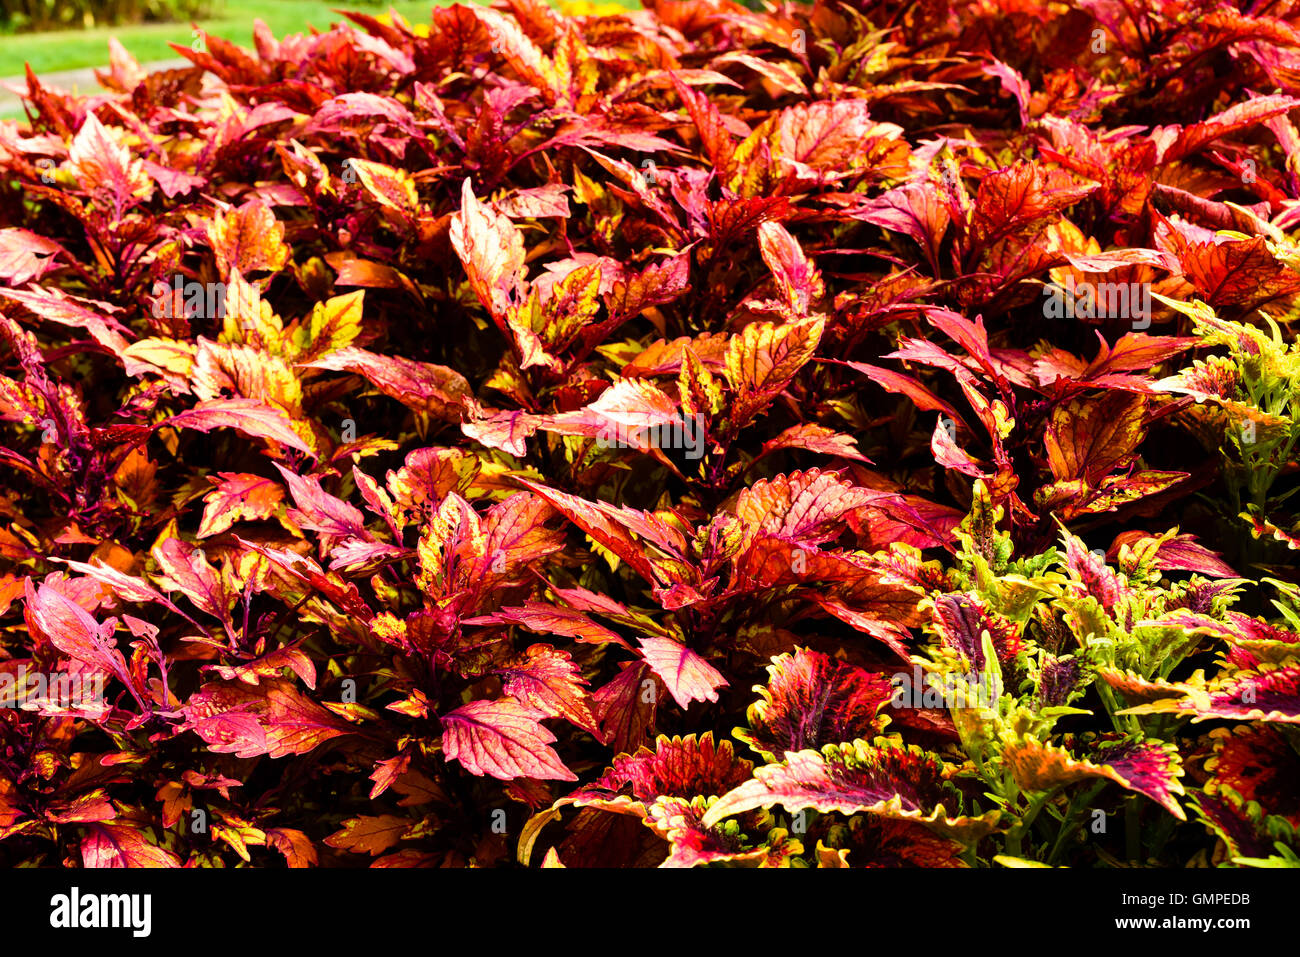 Plectranthus scutellarioides, coleus or painted nettle. Here the cultivar Ruffles Bordeaux in large number in a flowerbed. Stock Photo